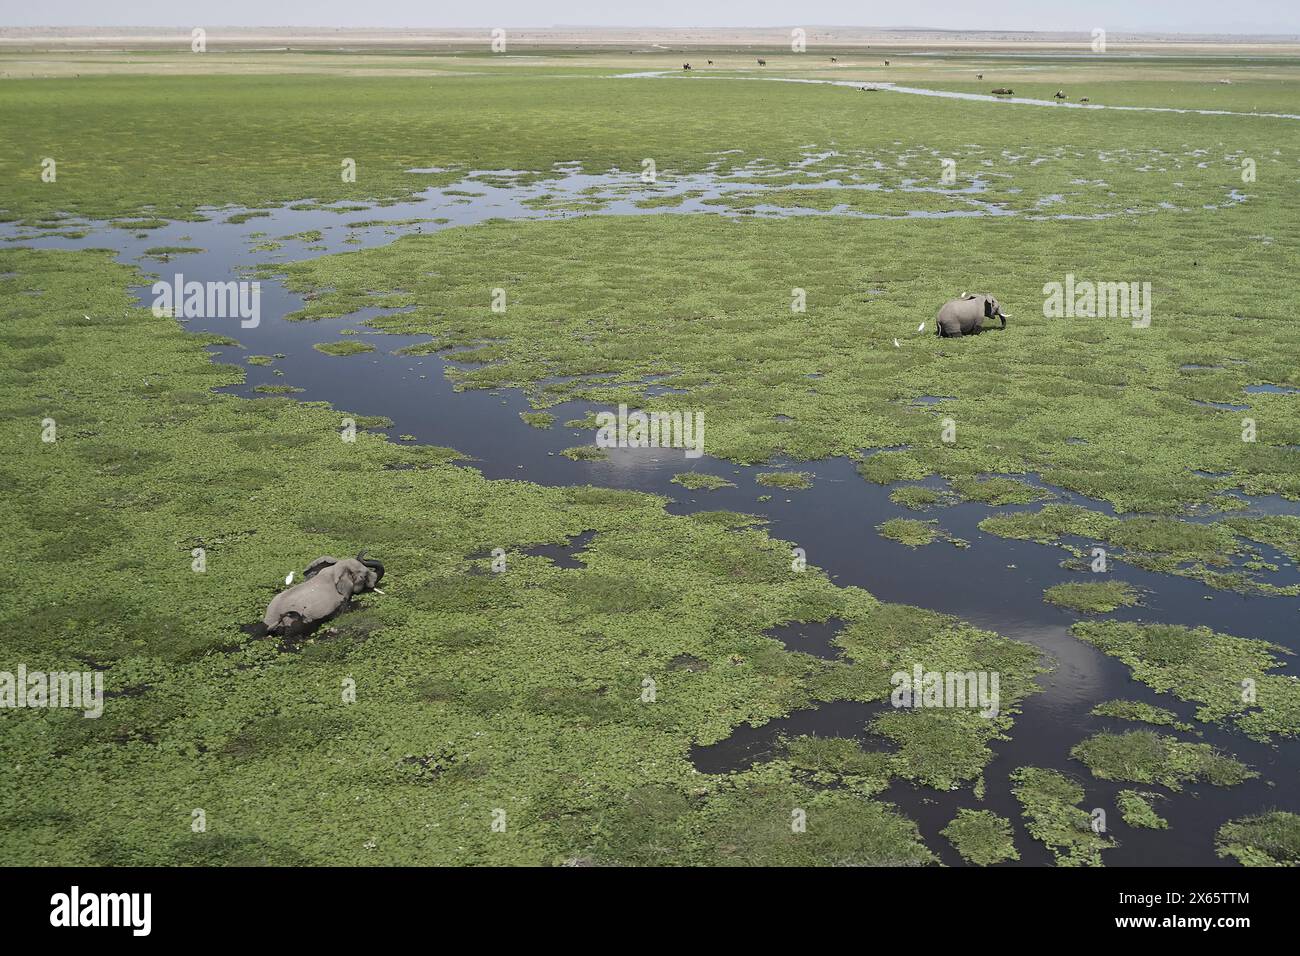 A herd of elephant meander across a swamp filled with green plan Stock Photo